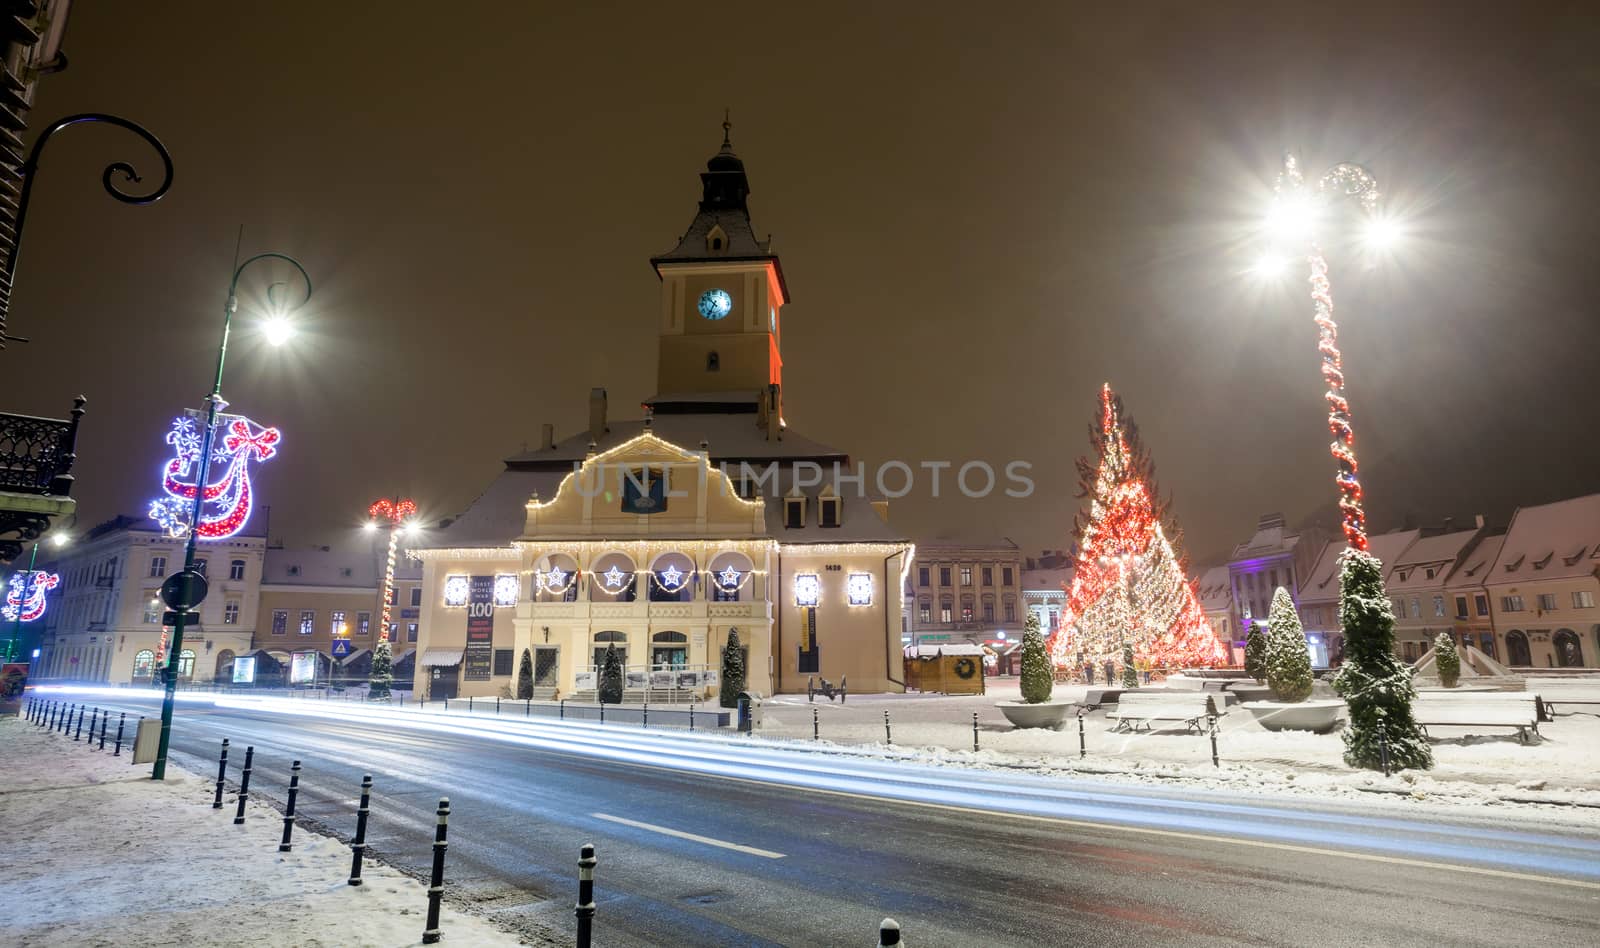 BRASOV, ROMANIA - 15 DECEMBER 2016: Brasov Council House night view with Christmas Tree decorated and traditional winter market in the old town center, Romania